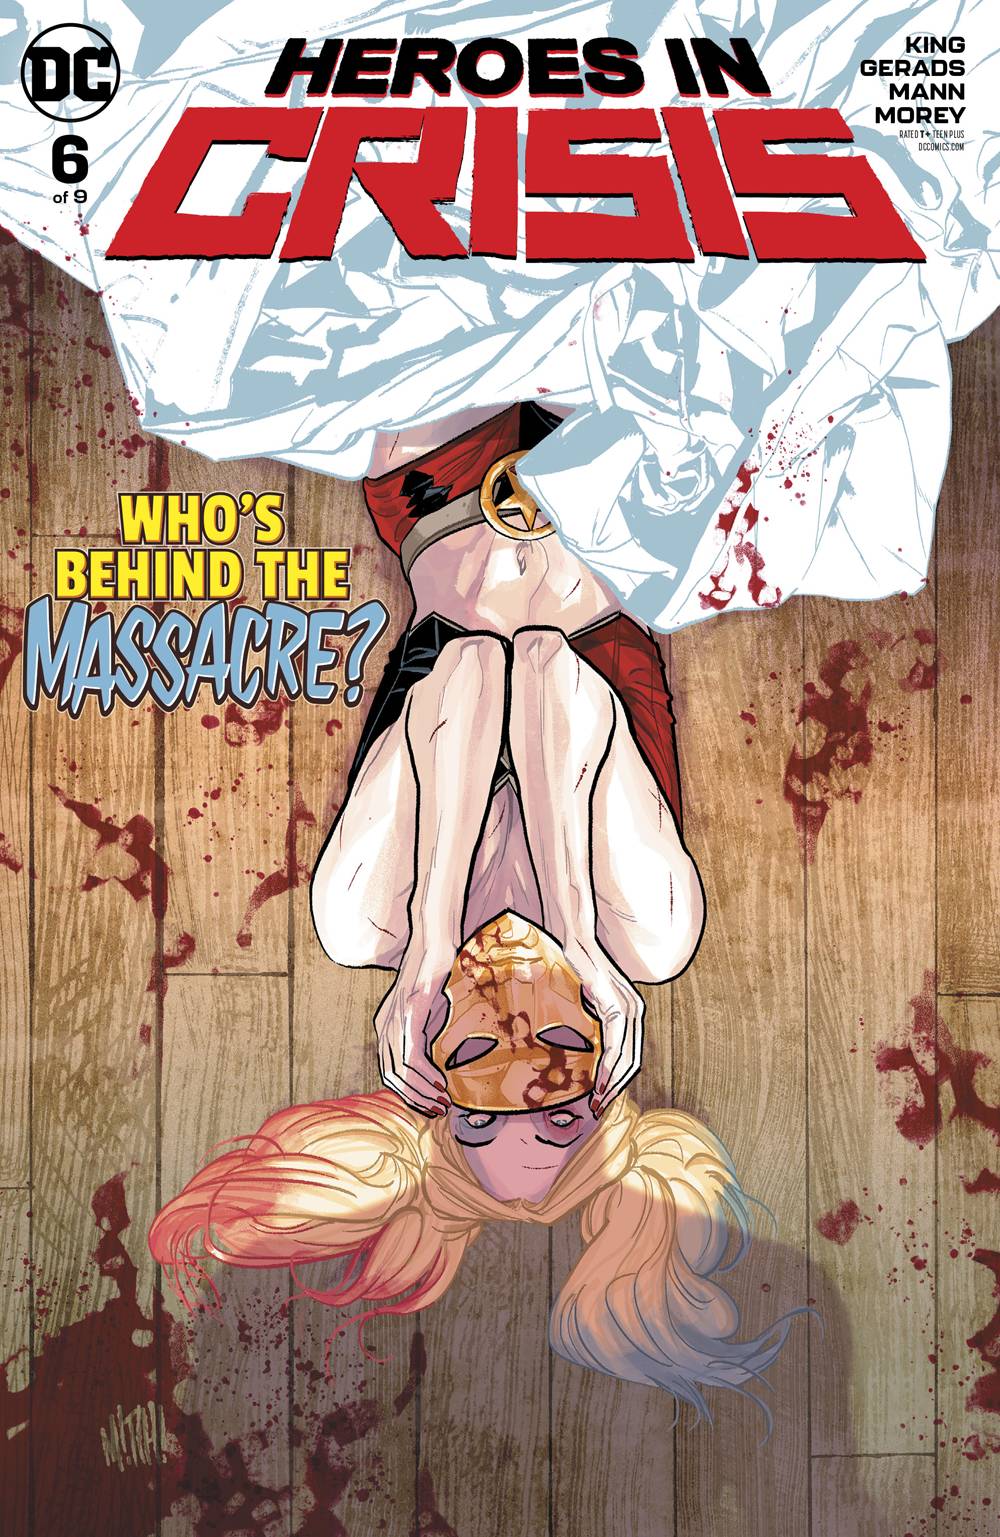 HEROES IN CRISIS #6 A (OF 9) DC Mitch Gerads Tom King (02/27/2019)